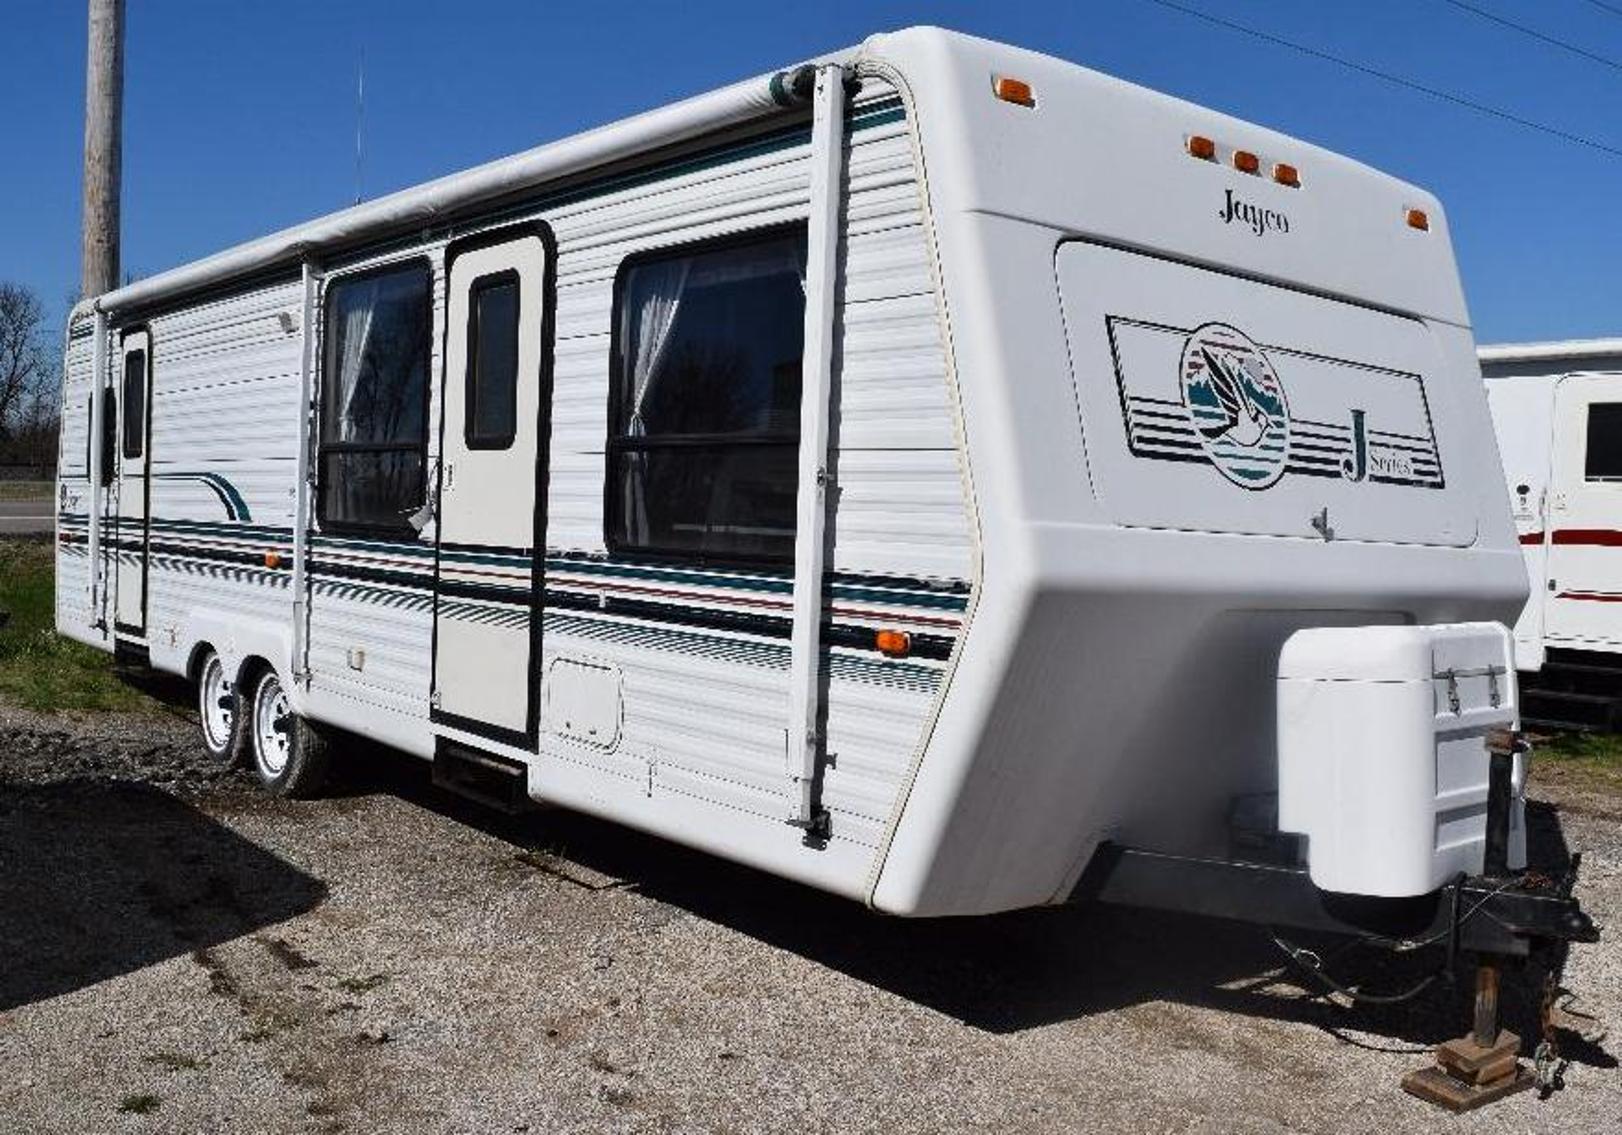 Early May Camper Auction